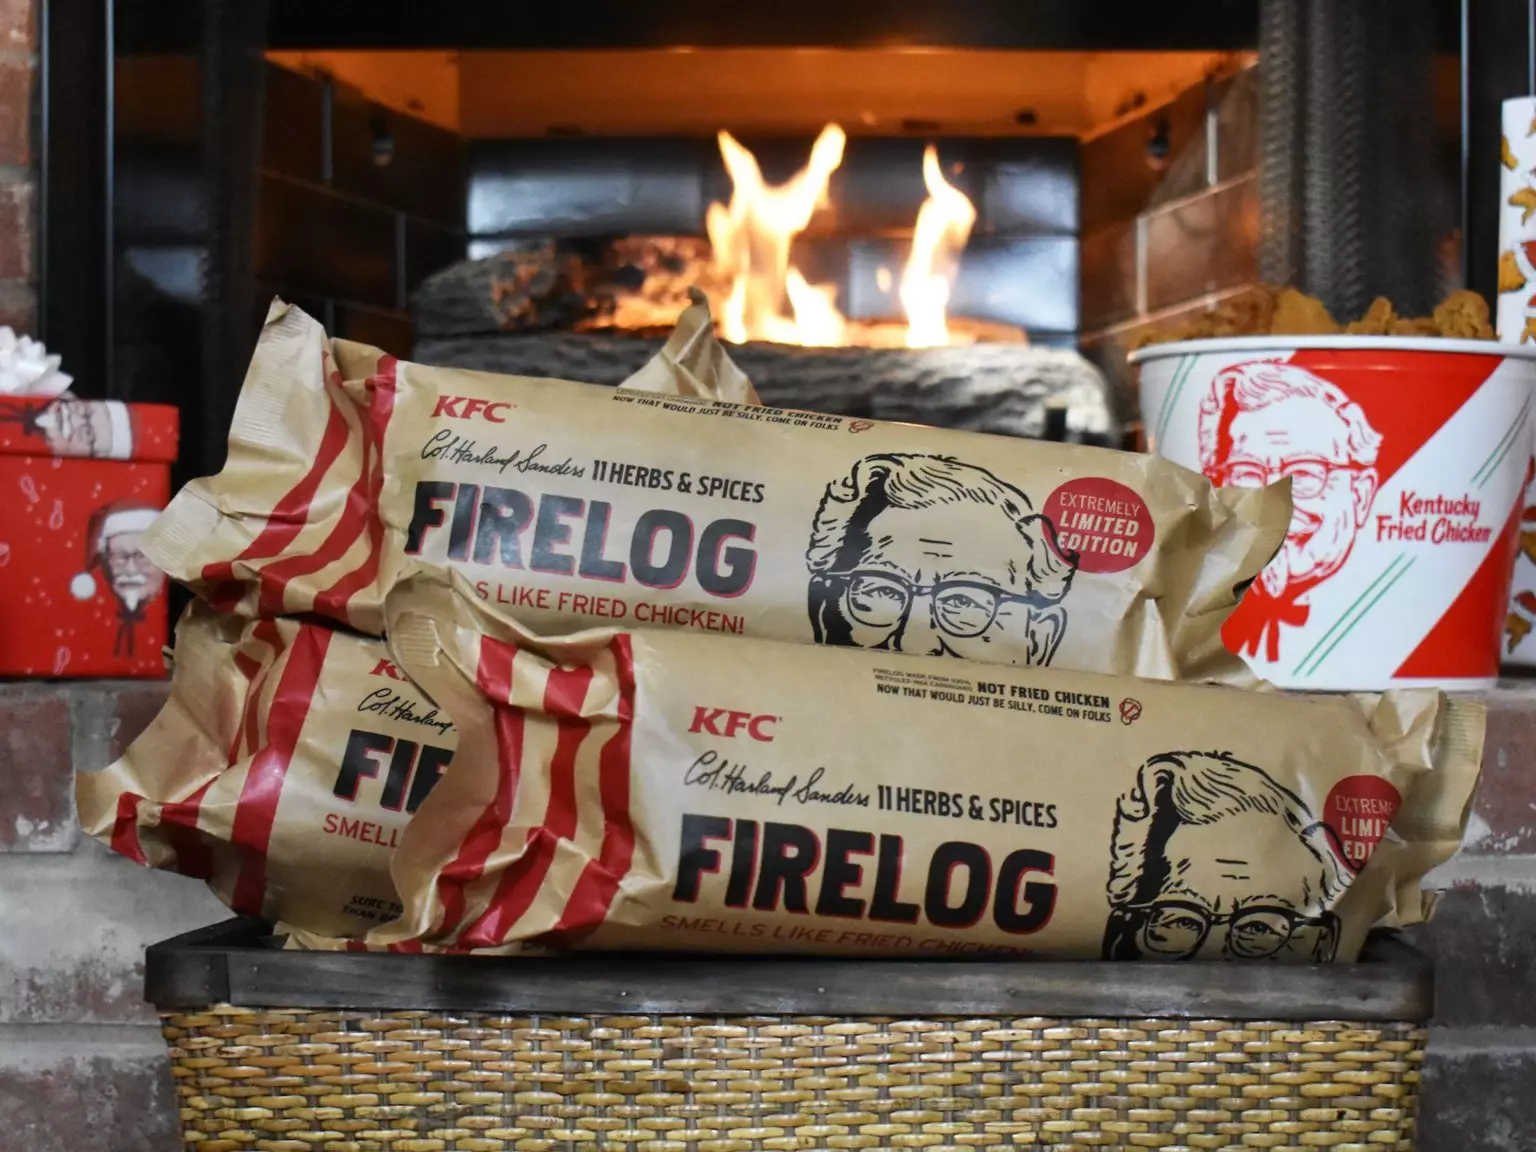 The KFC log is available to buy online in the States.